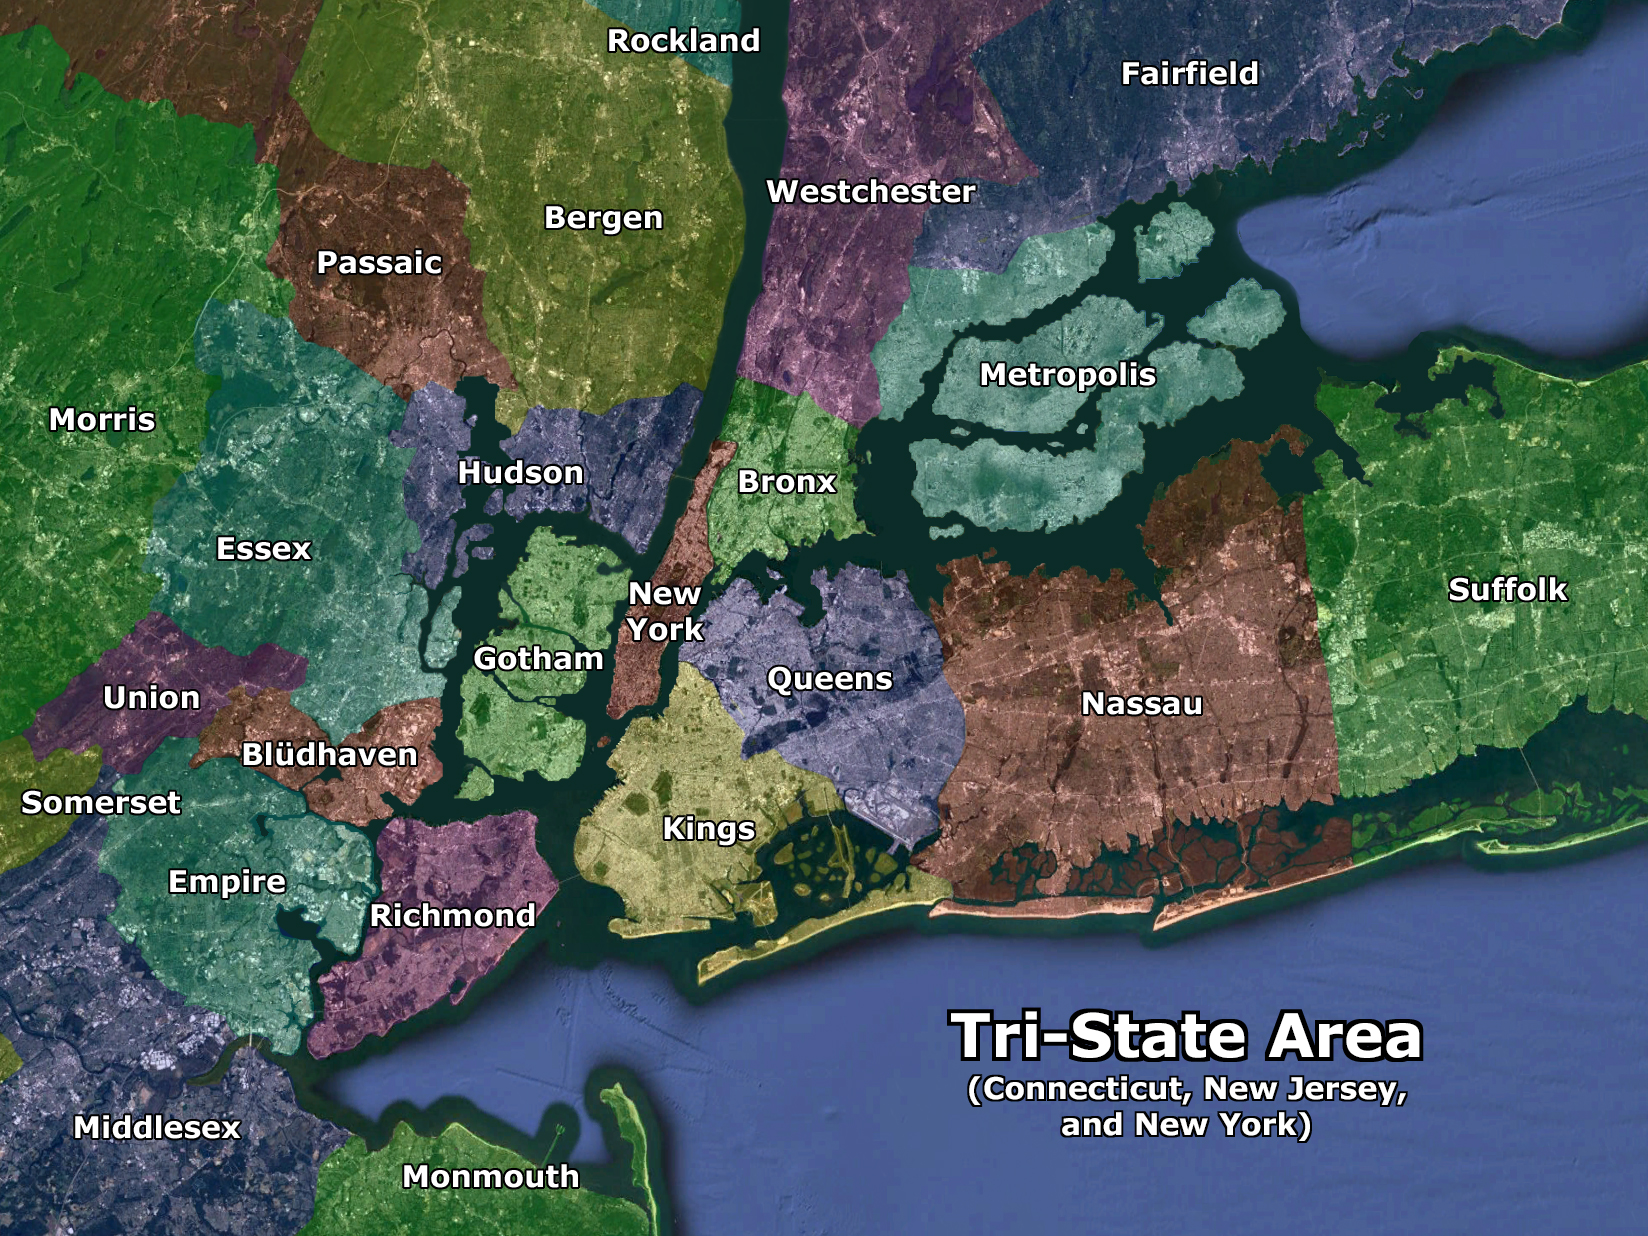 File:Map Tri-State Area (Counties).jpg